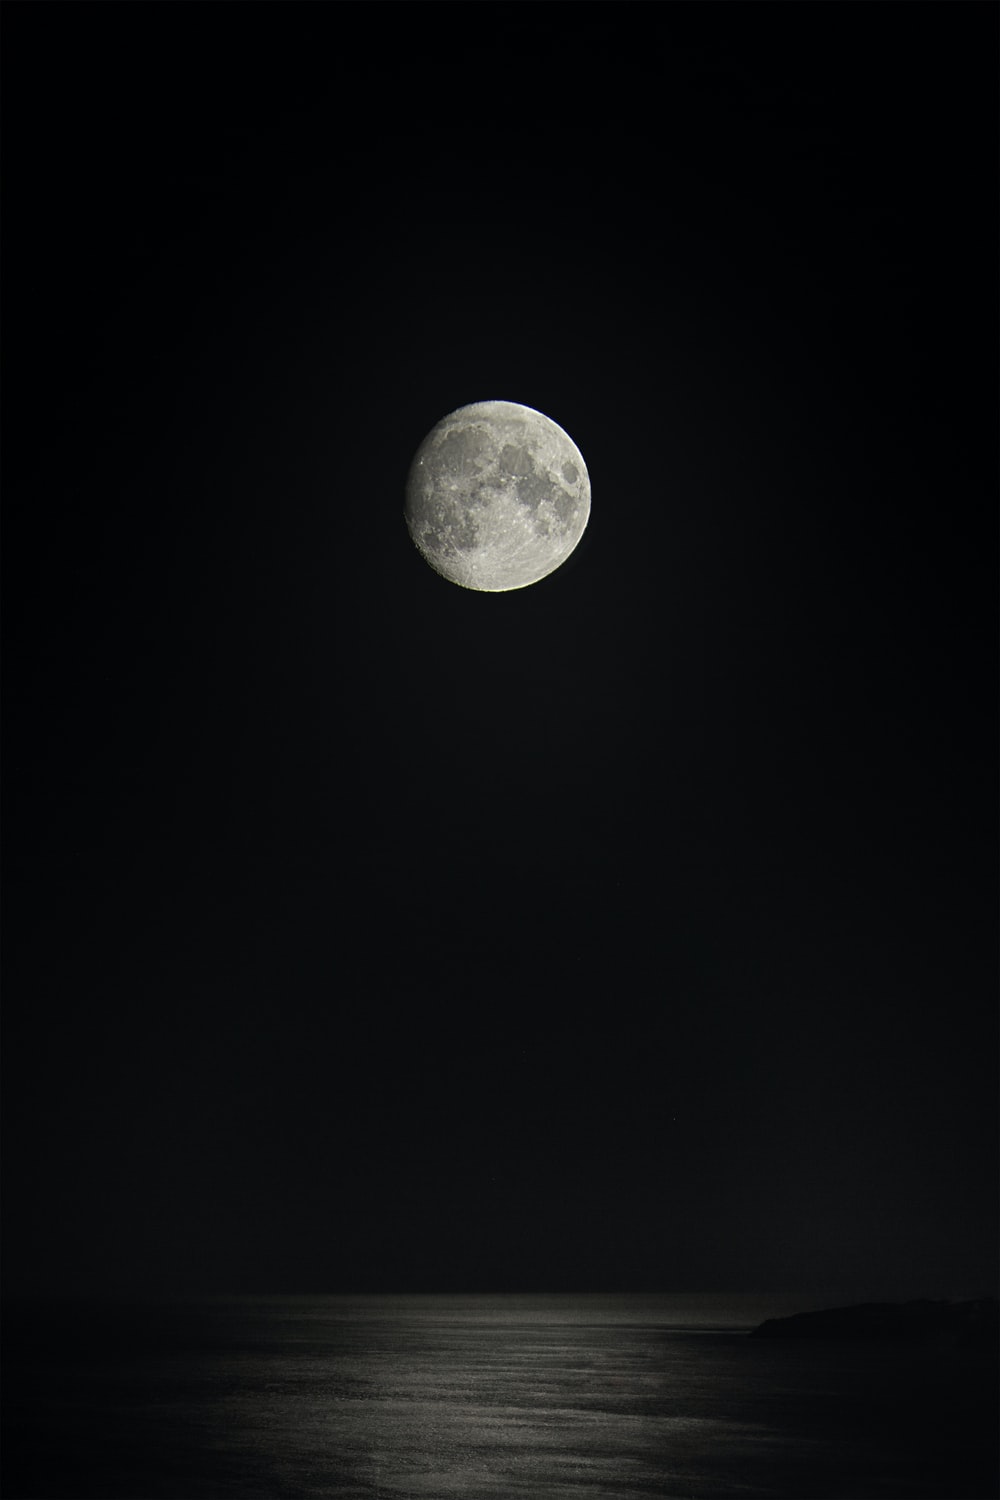 Dark Moon Picture. Download Free Image